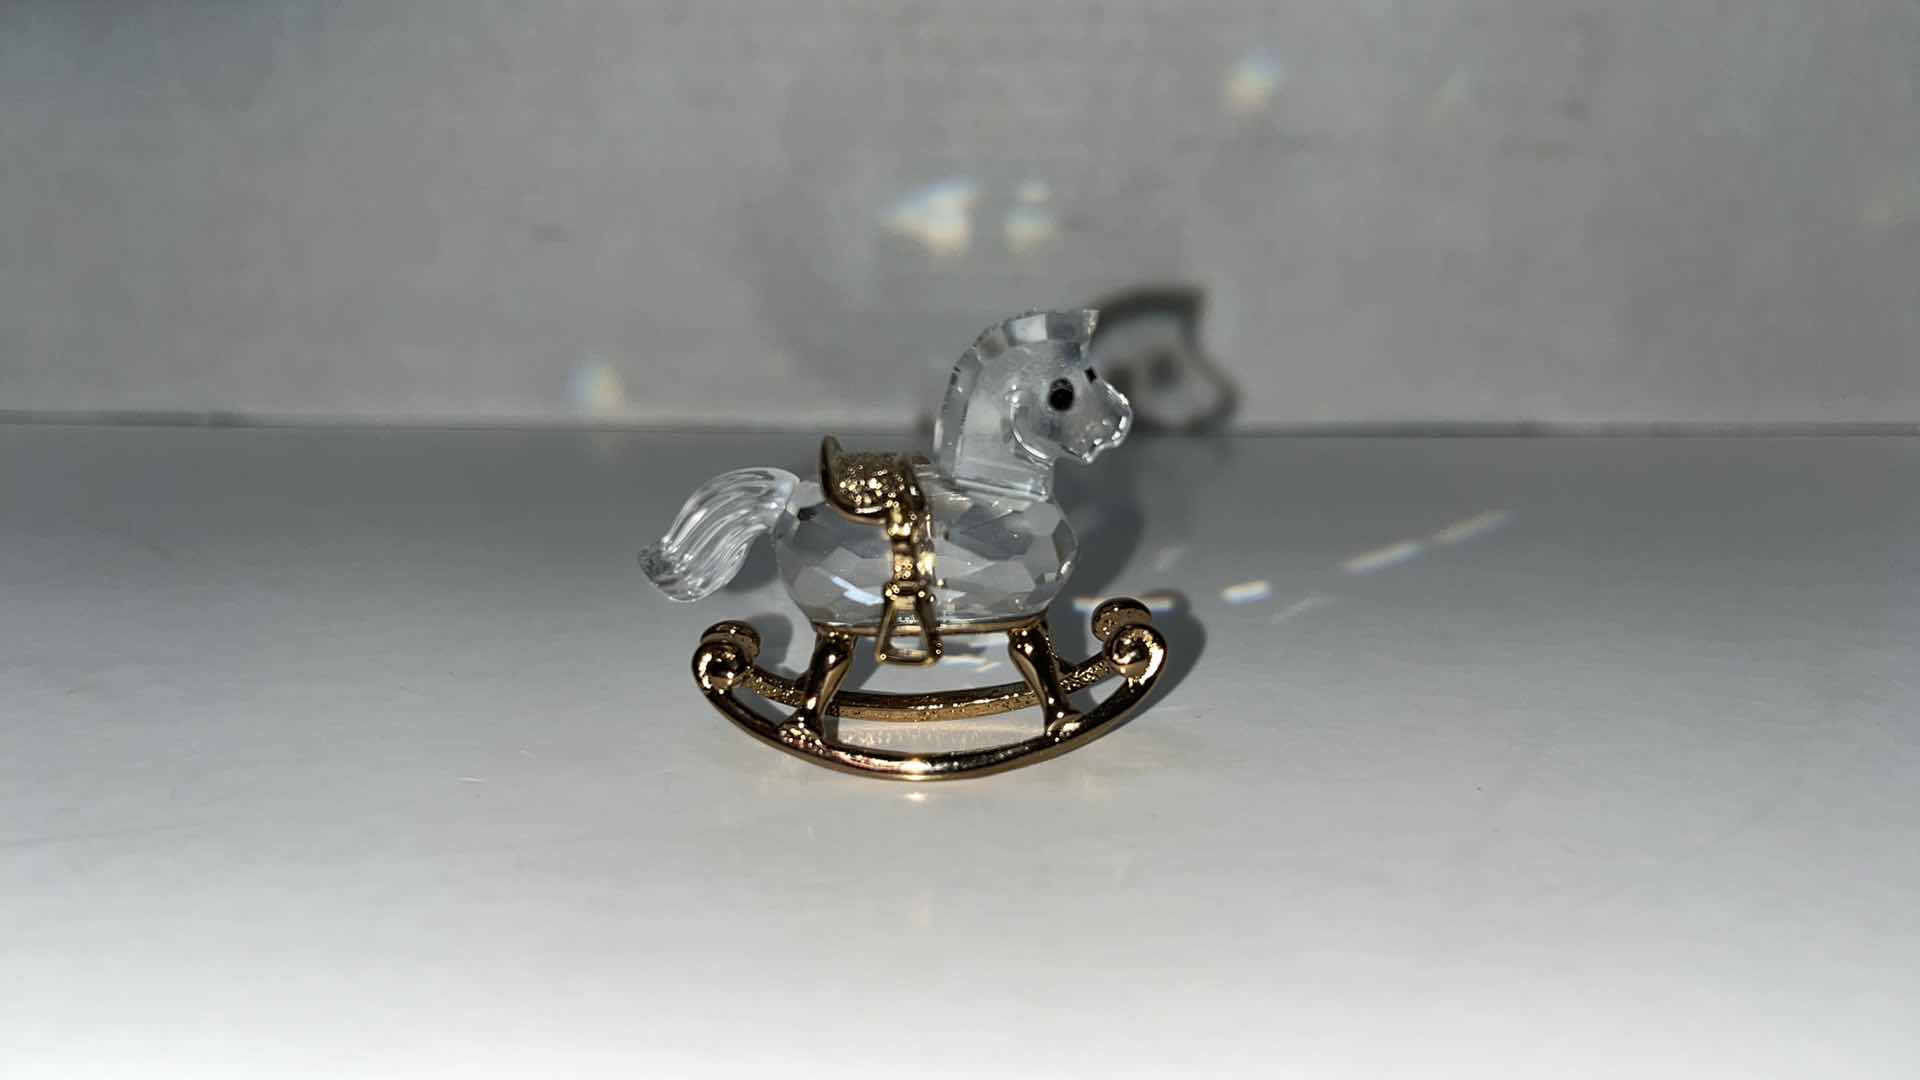 Photo 5 of HAND BLOWN CLEAR GLASS ROCKING UNICORN W GOLD ACCENTS 4.75” X 2” H4”W CRYSTAL ROCKING HORSE W GOLD ACCENTS (2)